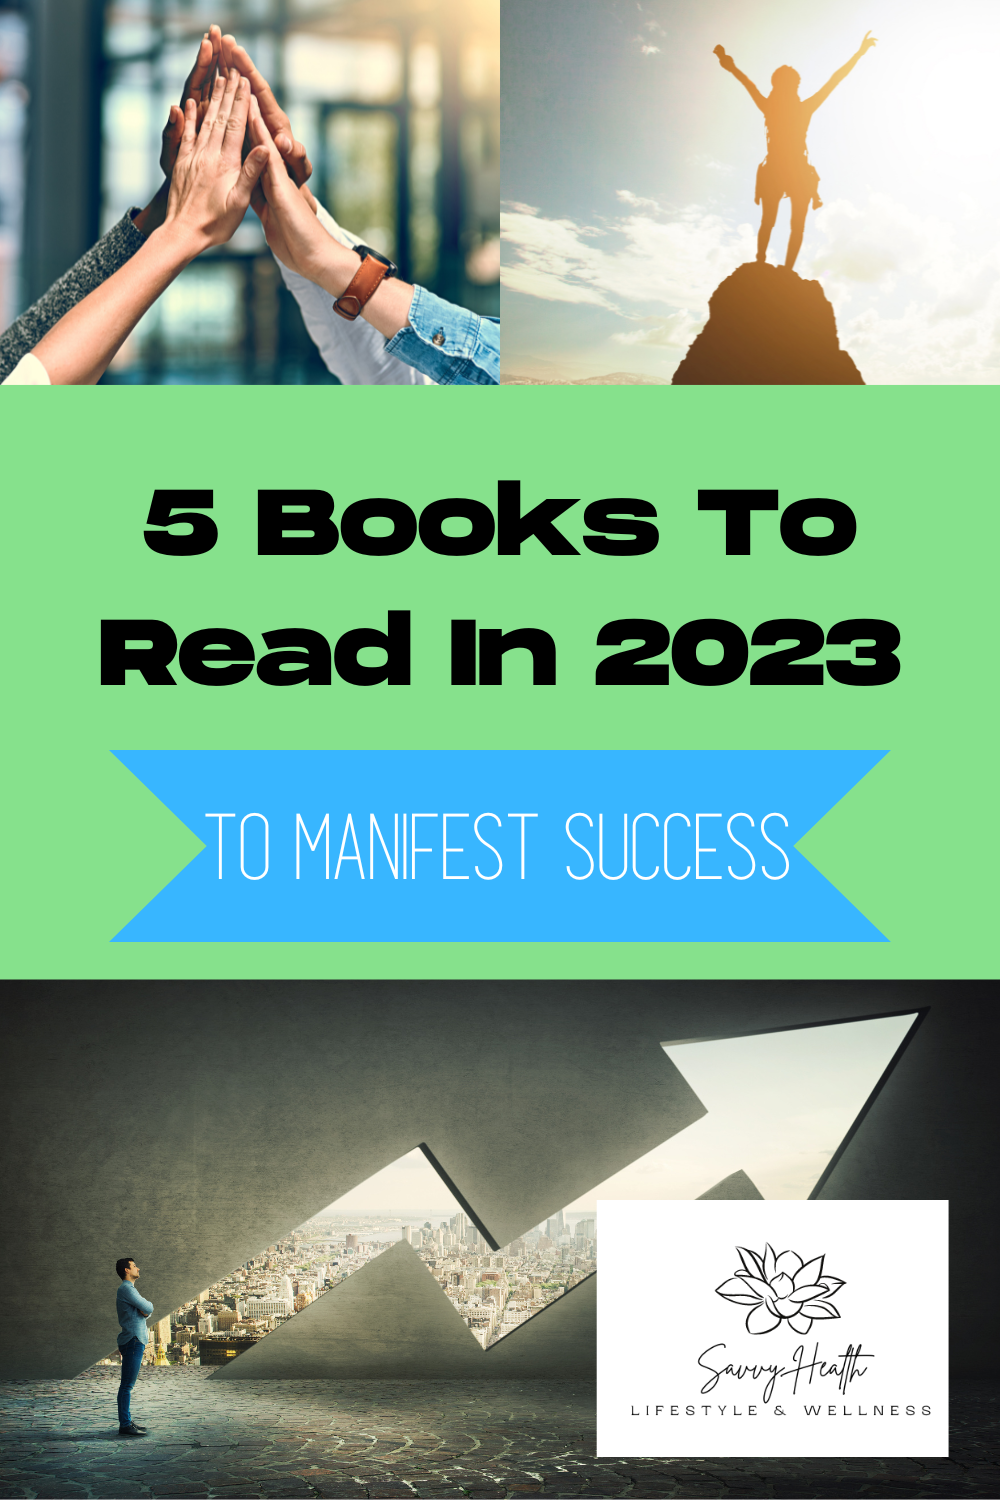 5 Books To Read In 2023 To Manifest Success Savvy Health